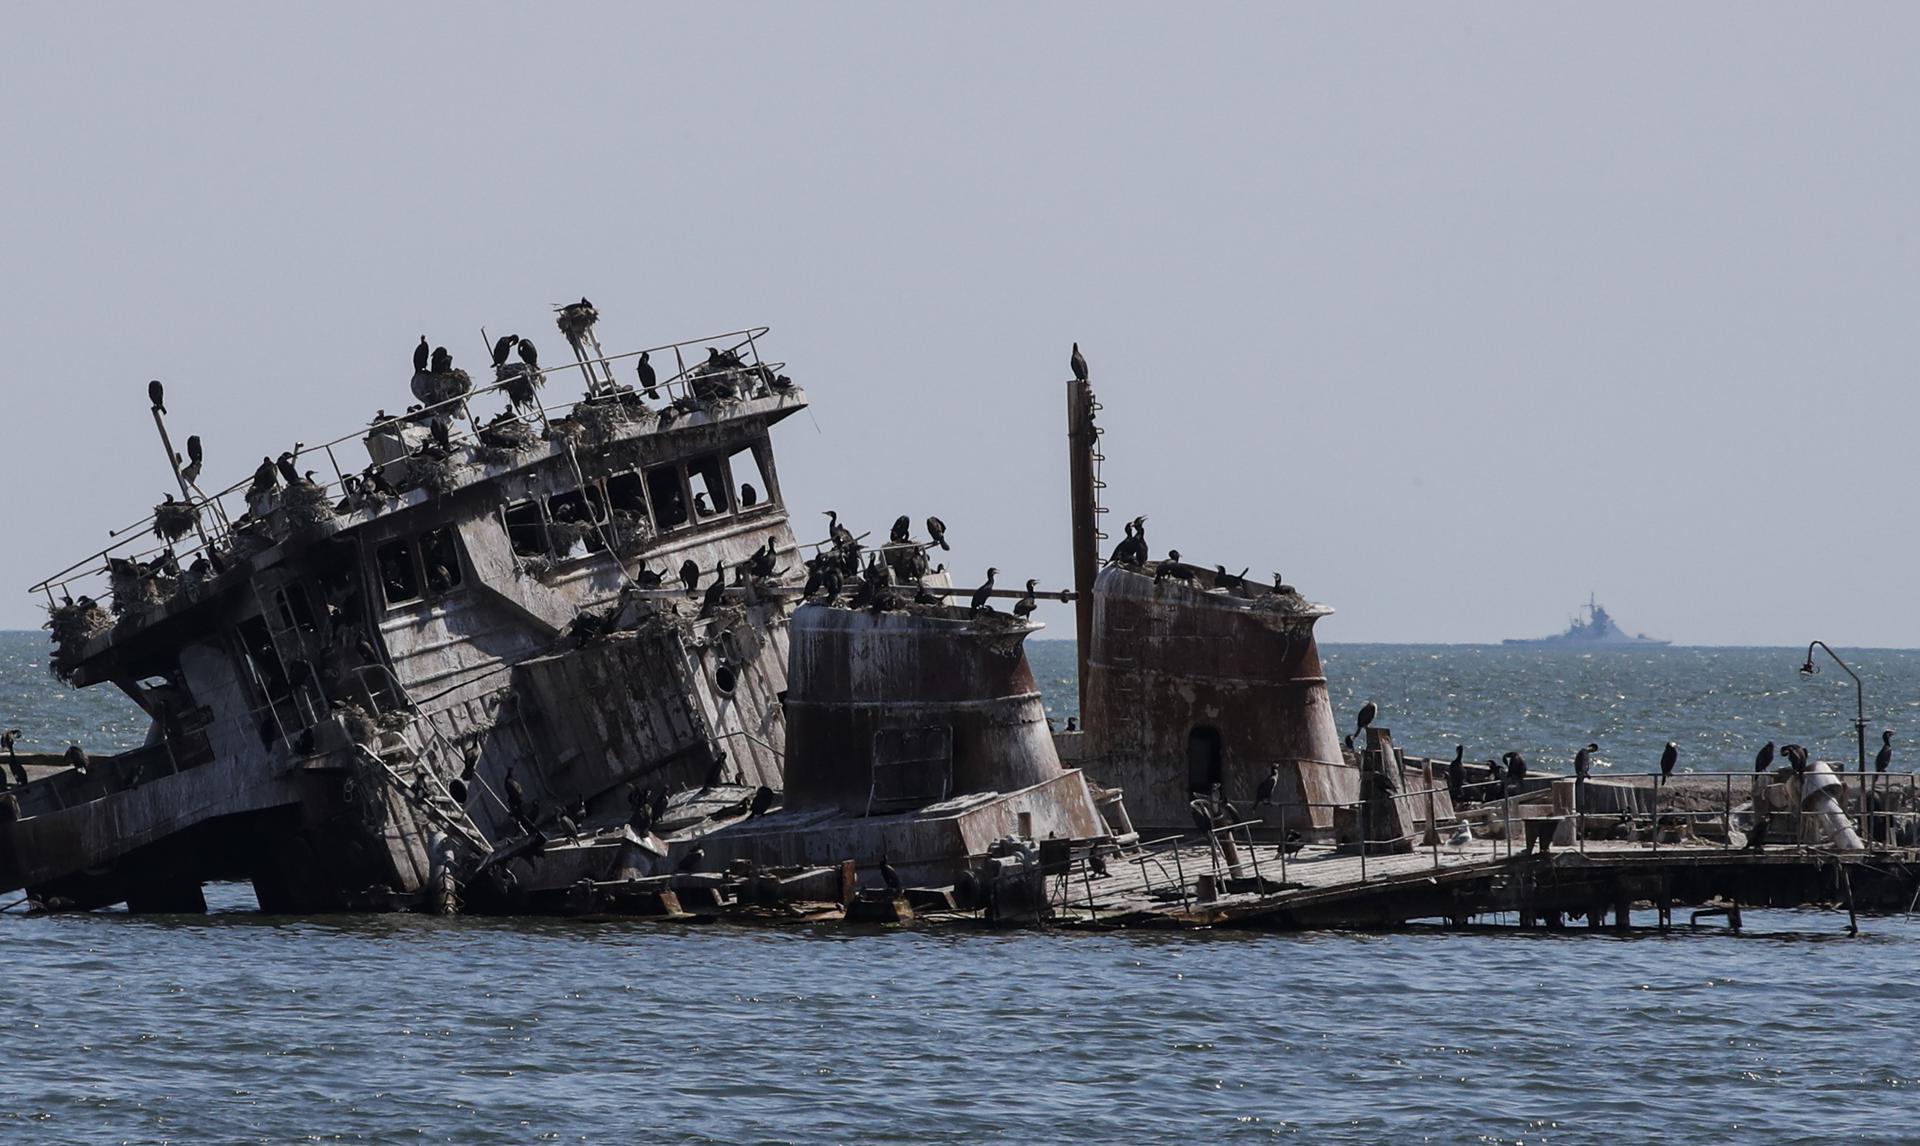 A file picture taken during a visit to Mariupol organized by the Russian military shows Russian warship guards in the Azov Sea behind a sunken Ukrainian ship on the cargo sea port of Mariupol, Ukraine, 29 April 2022. EFE-EPA/SERGEI ILNITSKY